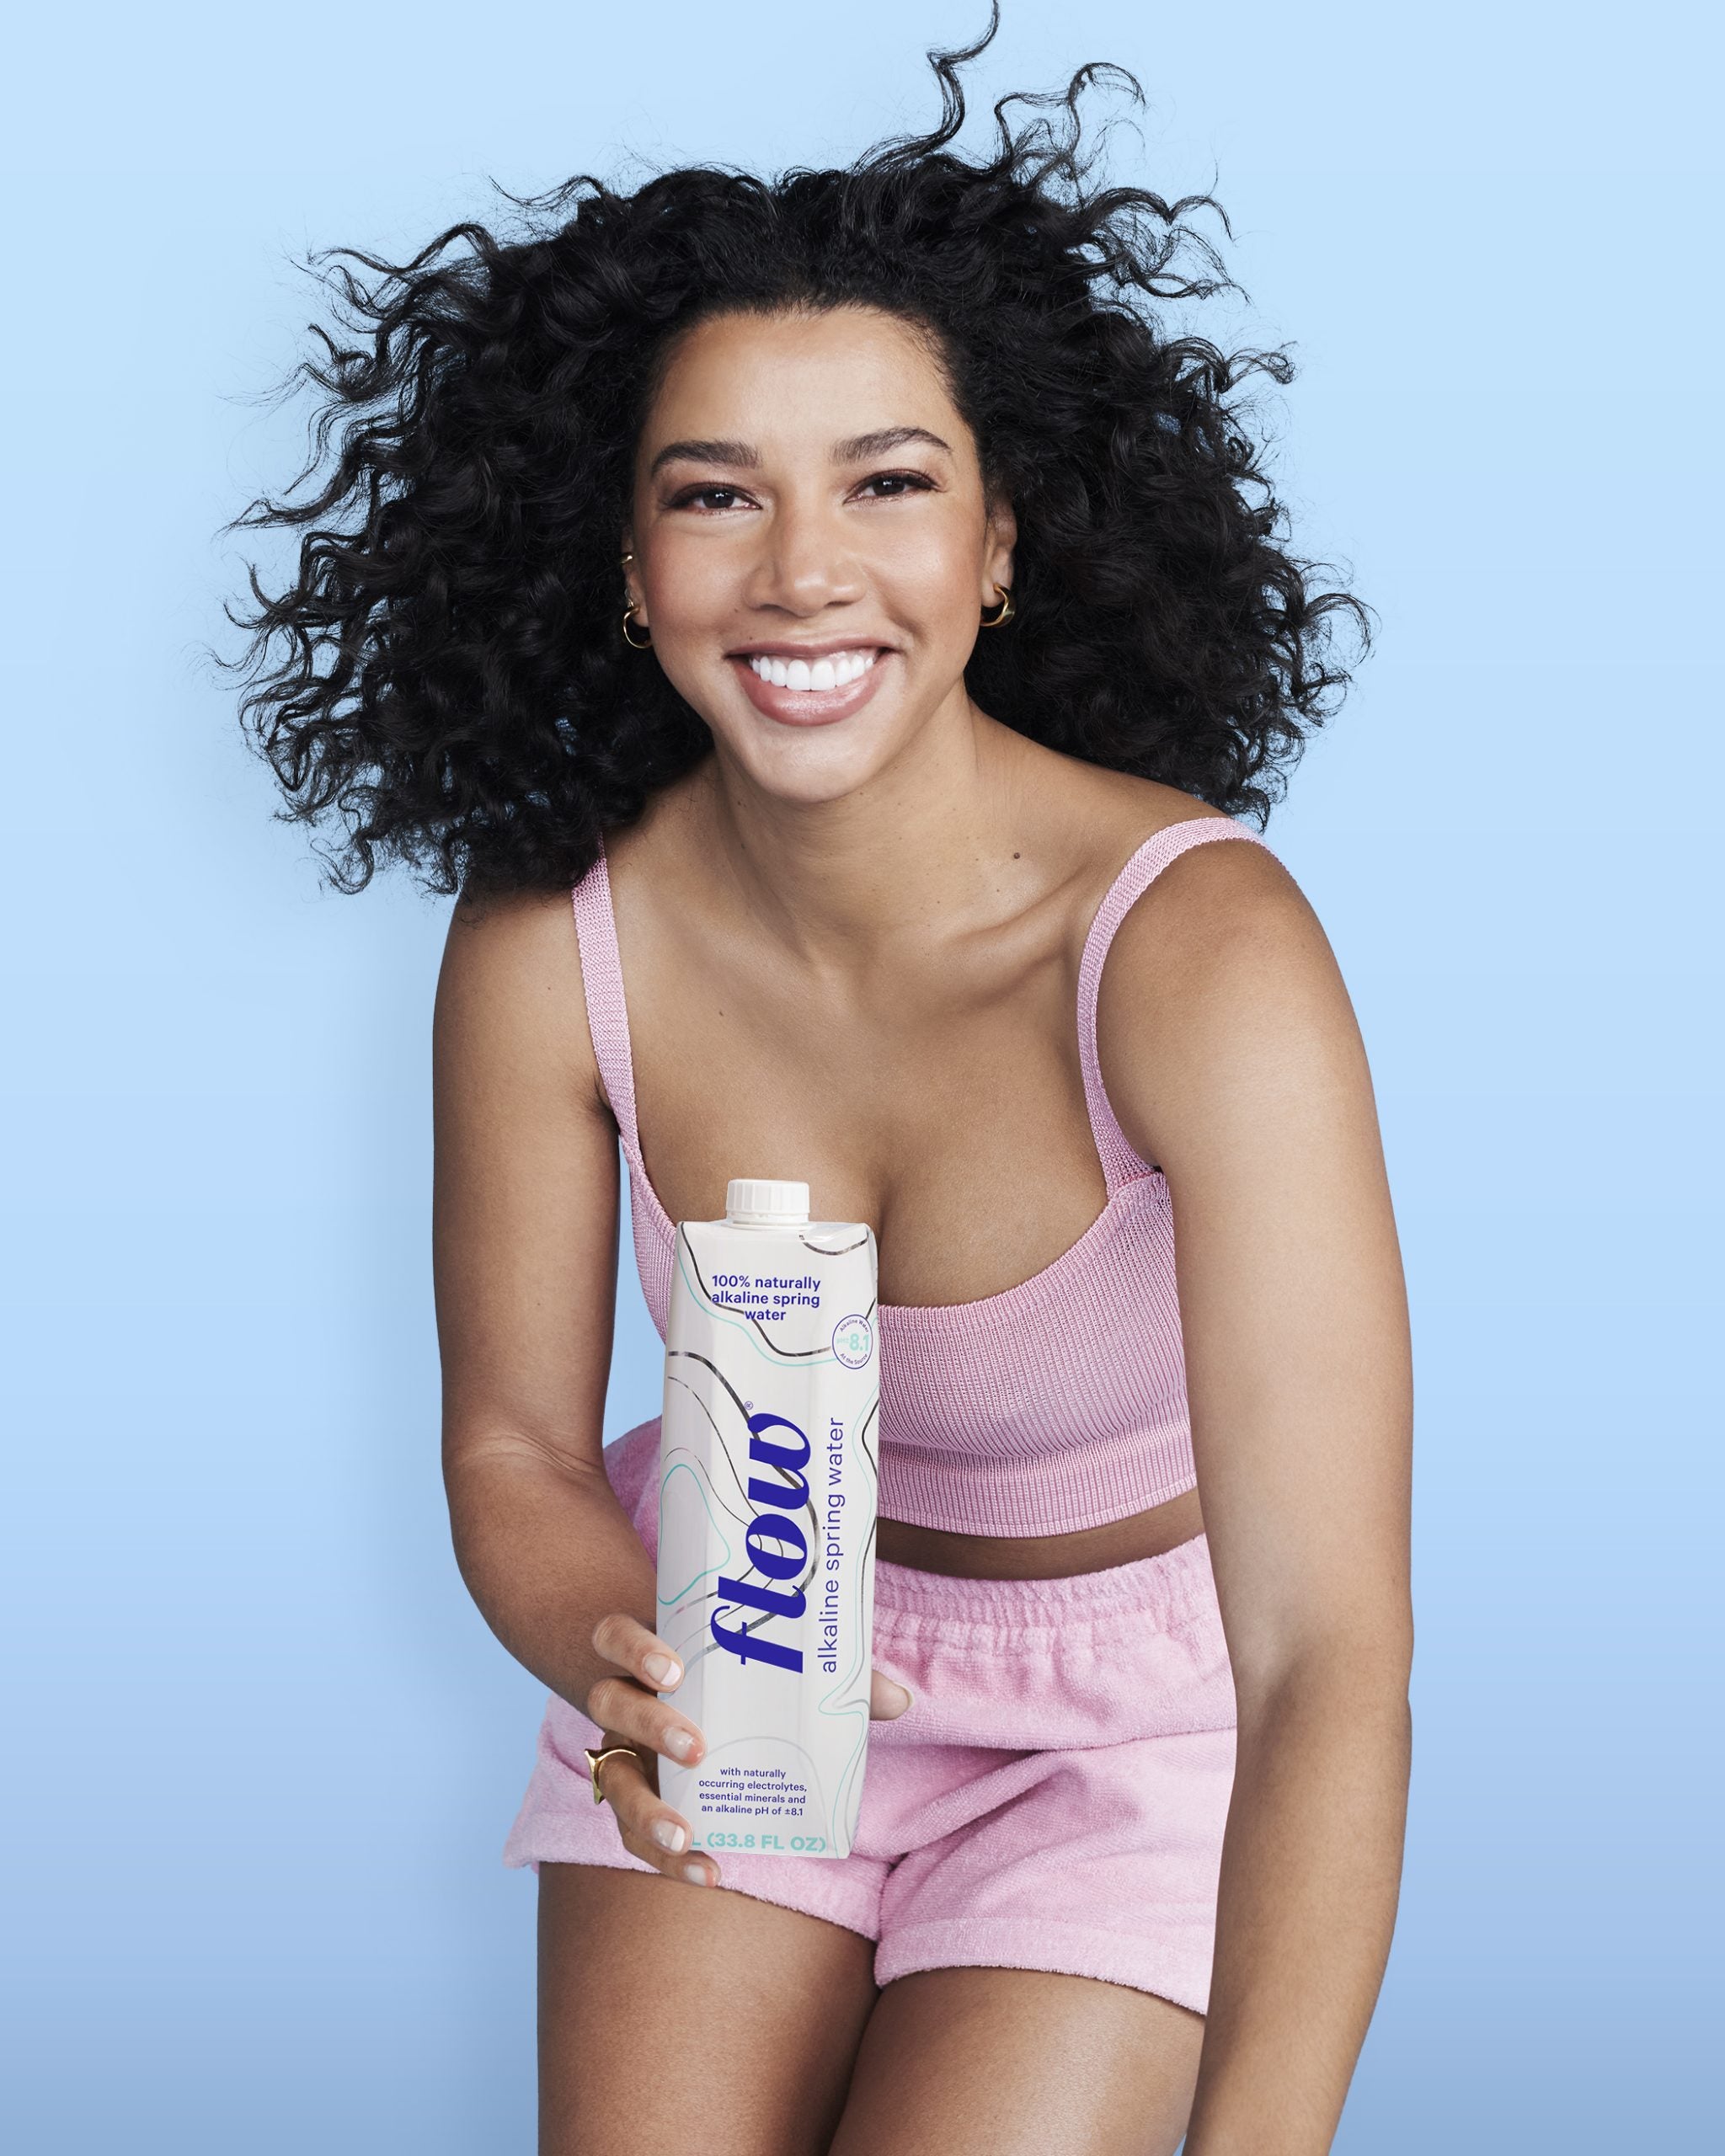 Hannah Bronfman On How Her Body And Her Connection To It Changed With IVF, Pregnancy, And Postpartum